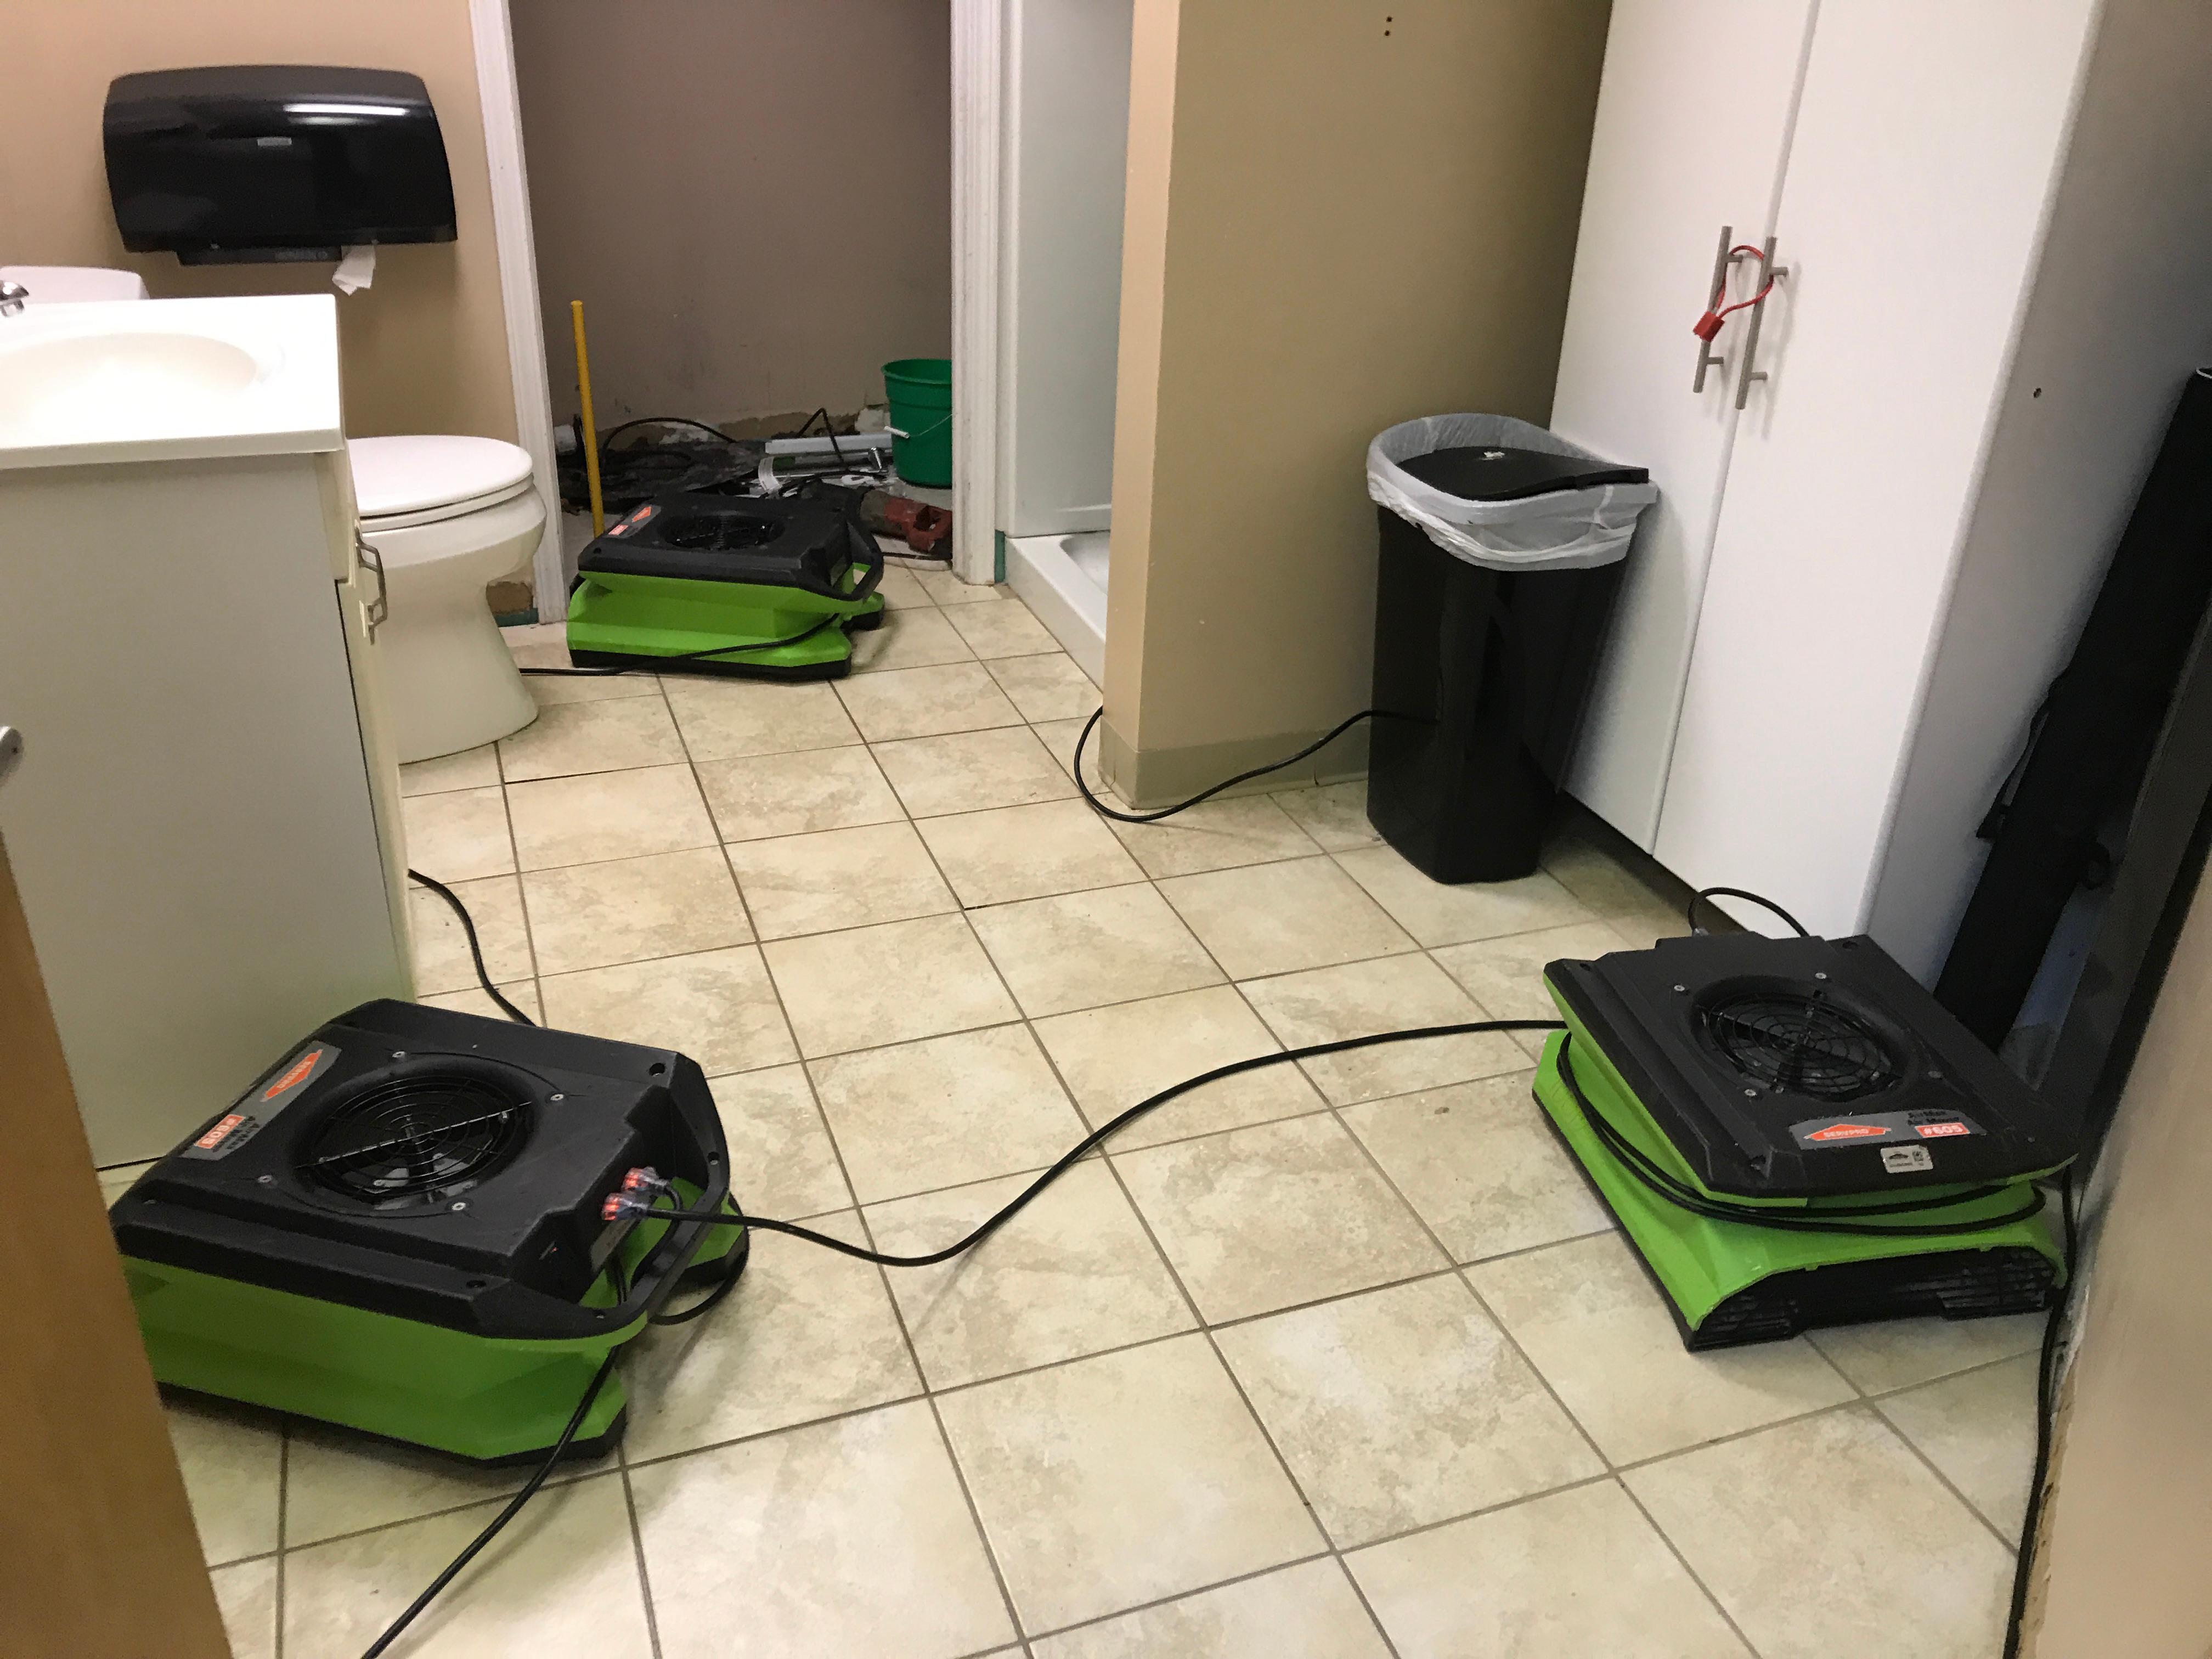 When mold starts to invade your home, dealing with mold removal quickly and safely should be a priority. It can take less than 72 hours for mold to spread throughout your home. You need us, your local SERVPRO team! We are quick to respond and can have your property looking and feeling like it never even happened.